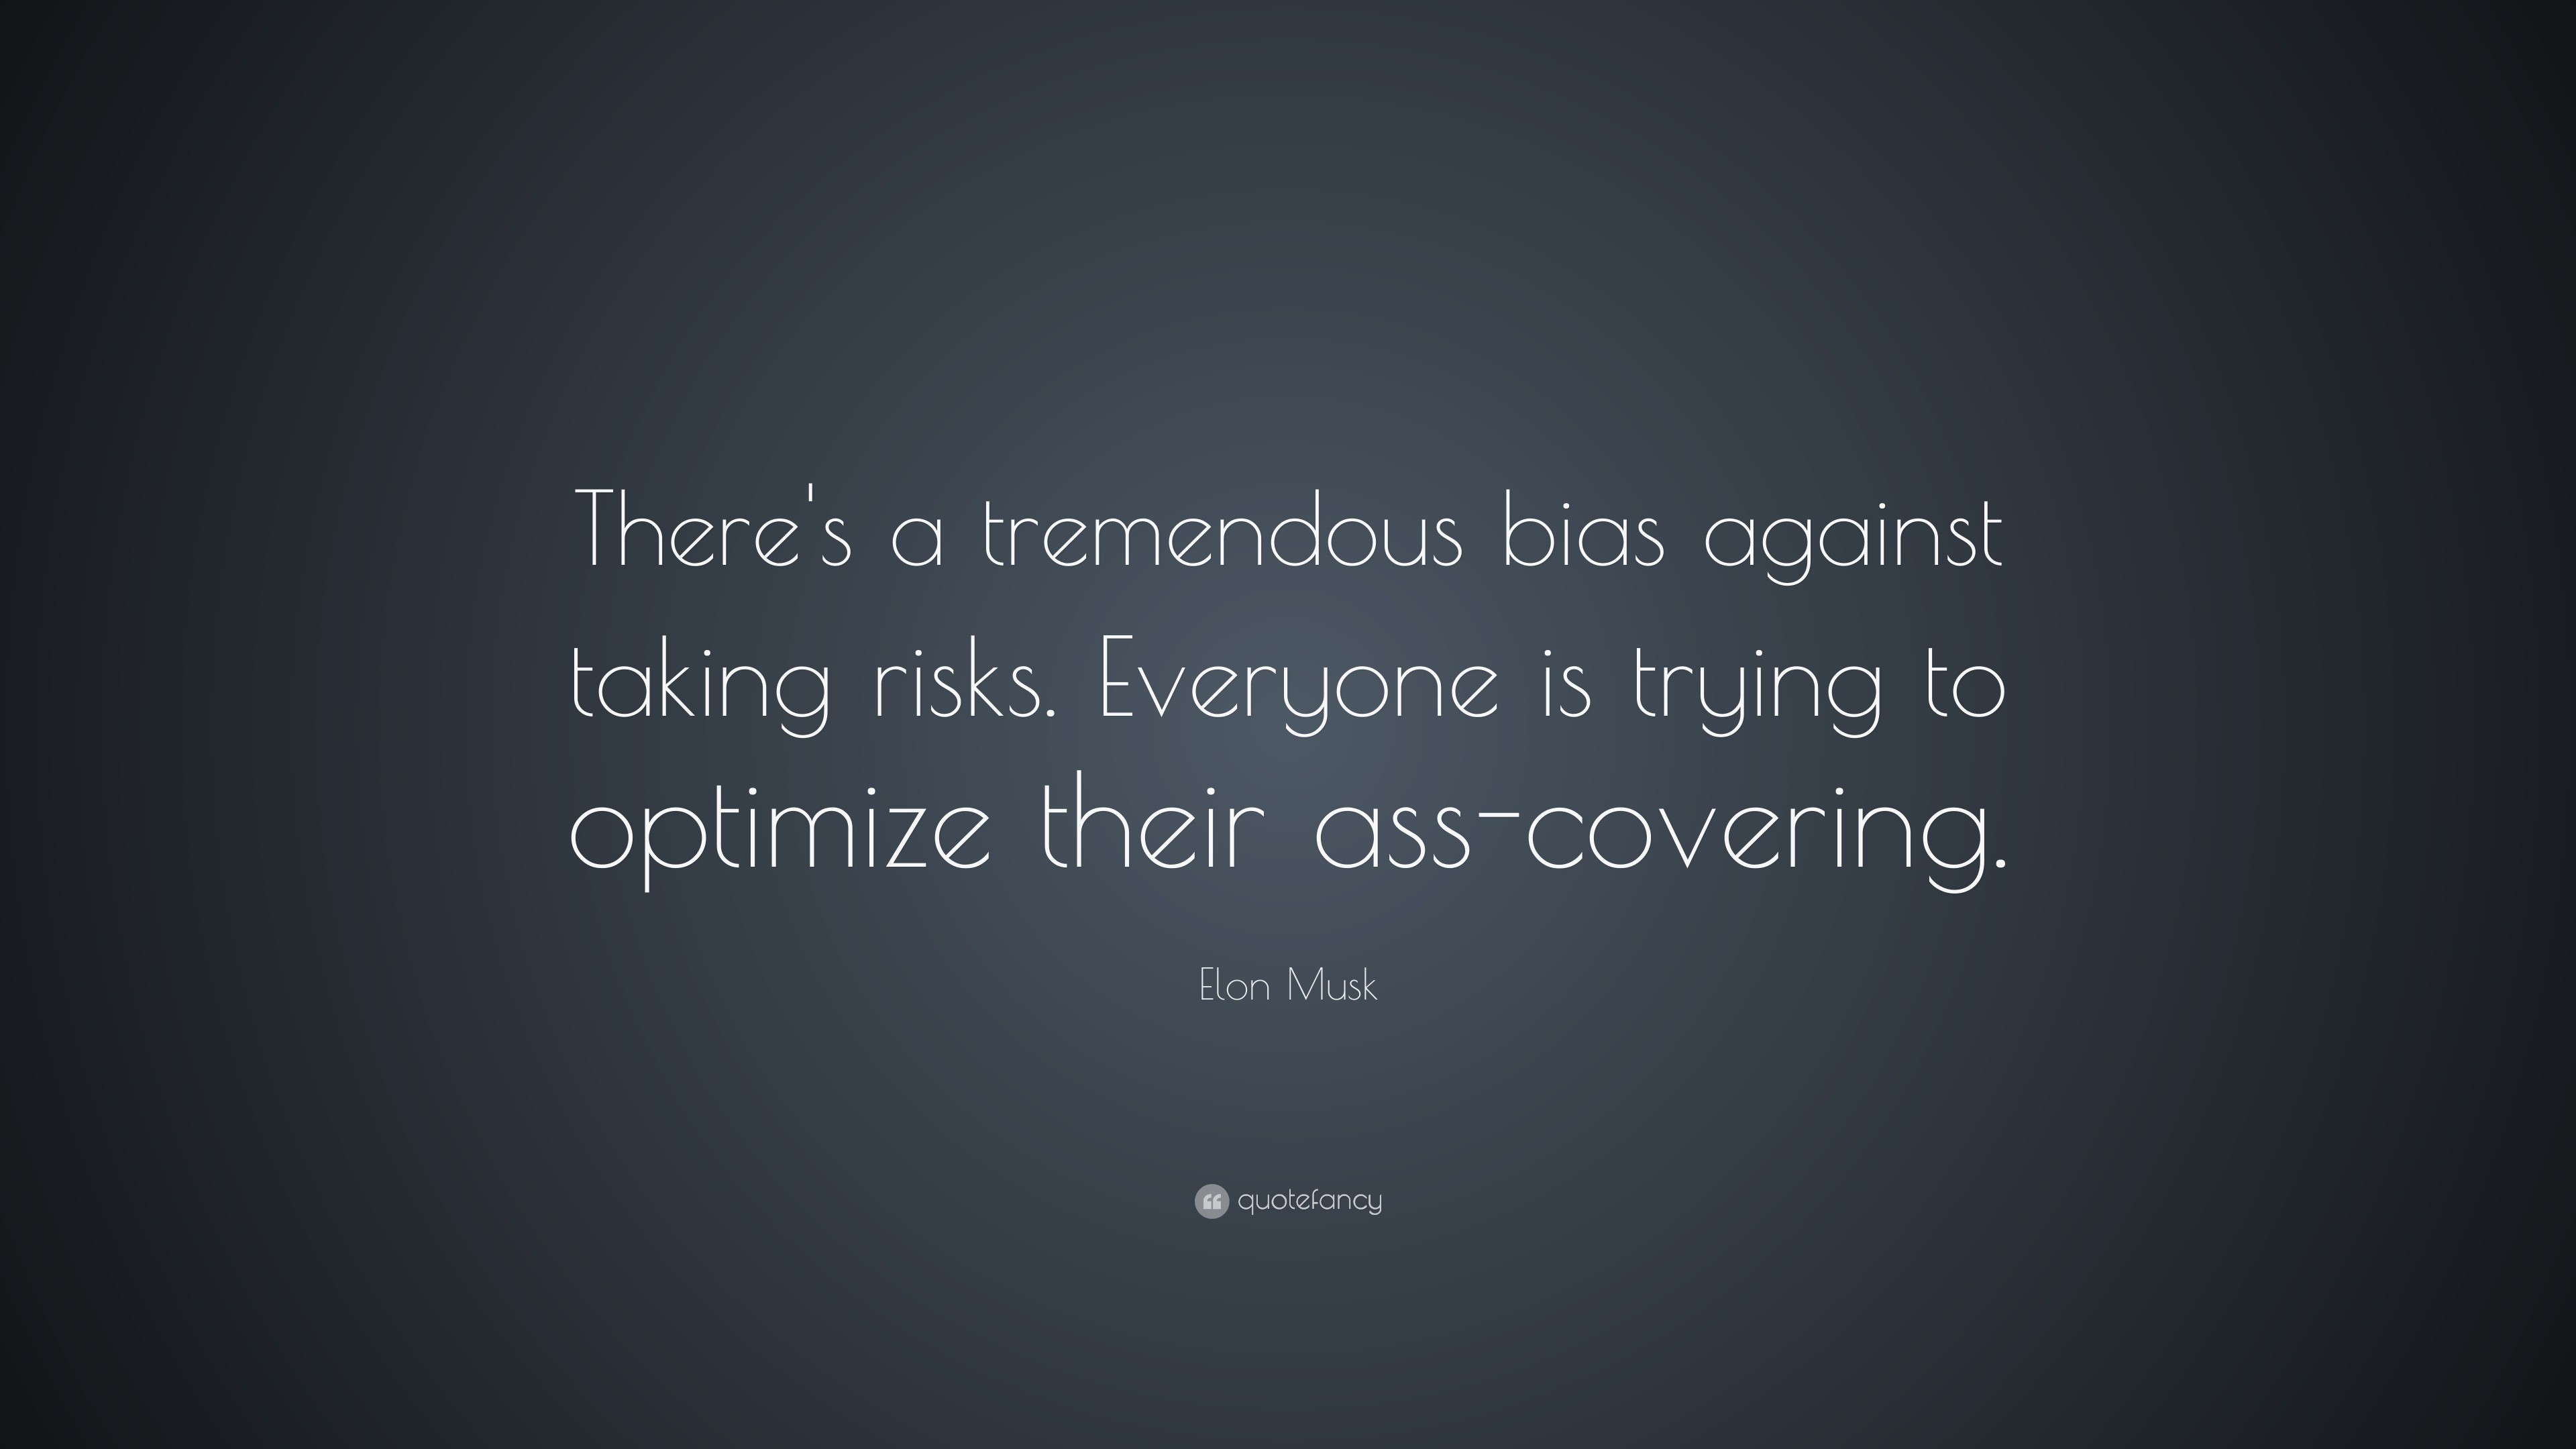 Elon Musk Quote Theres a tremendous bias against taking risks. Everyone is trying